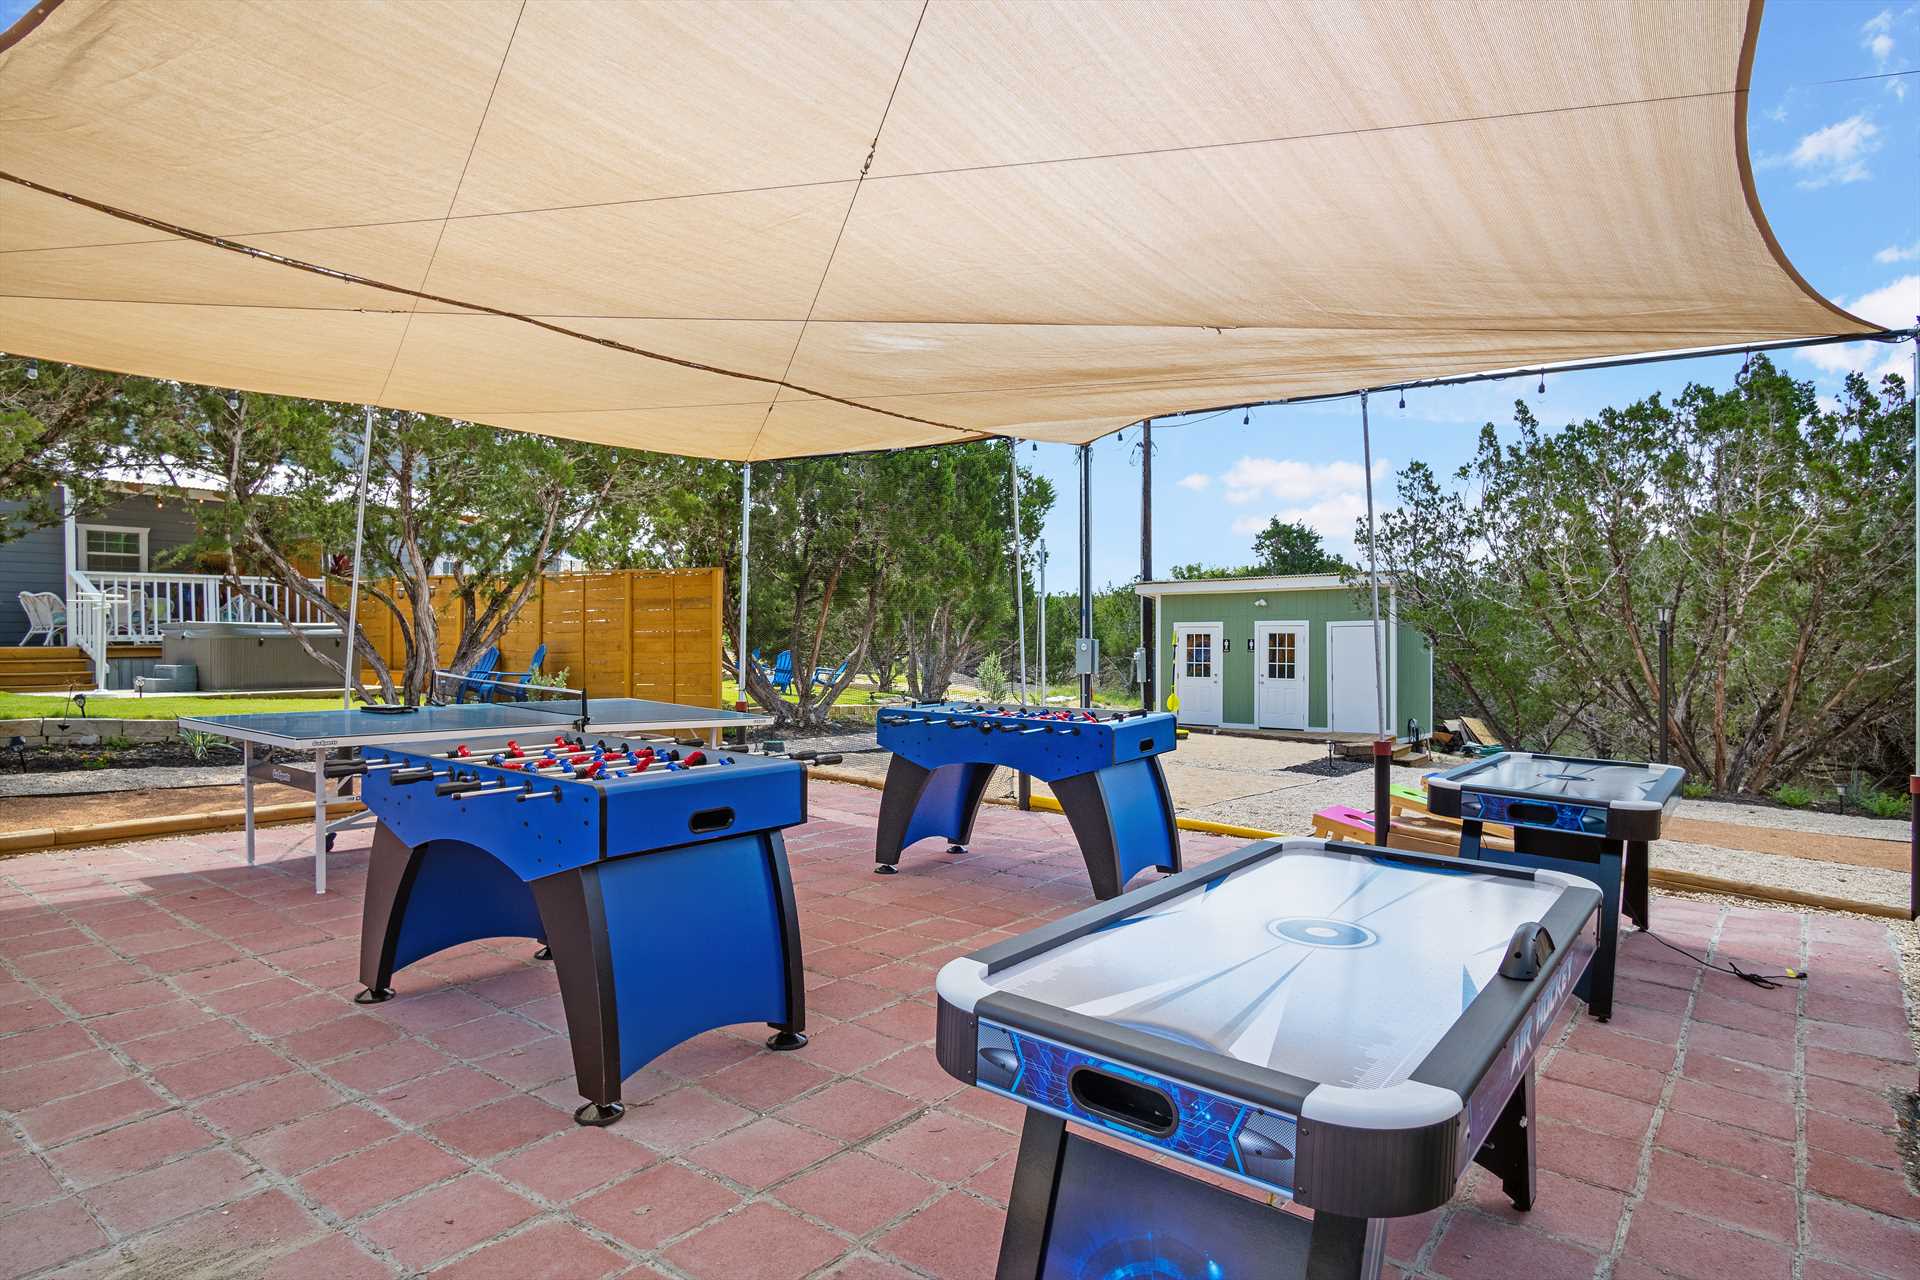                                                 Brand-new foosball, air hockey, and ping pong tables await you in the shade!